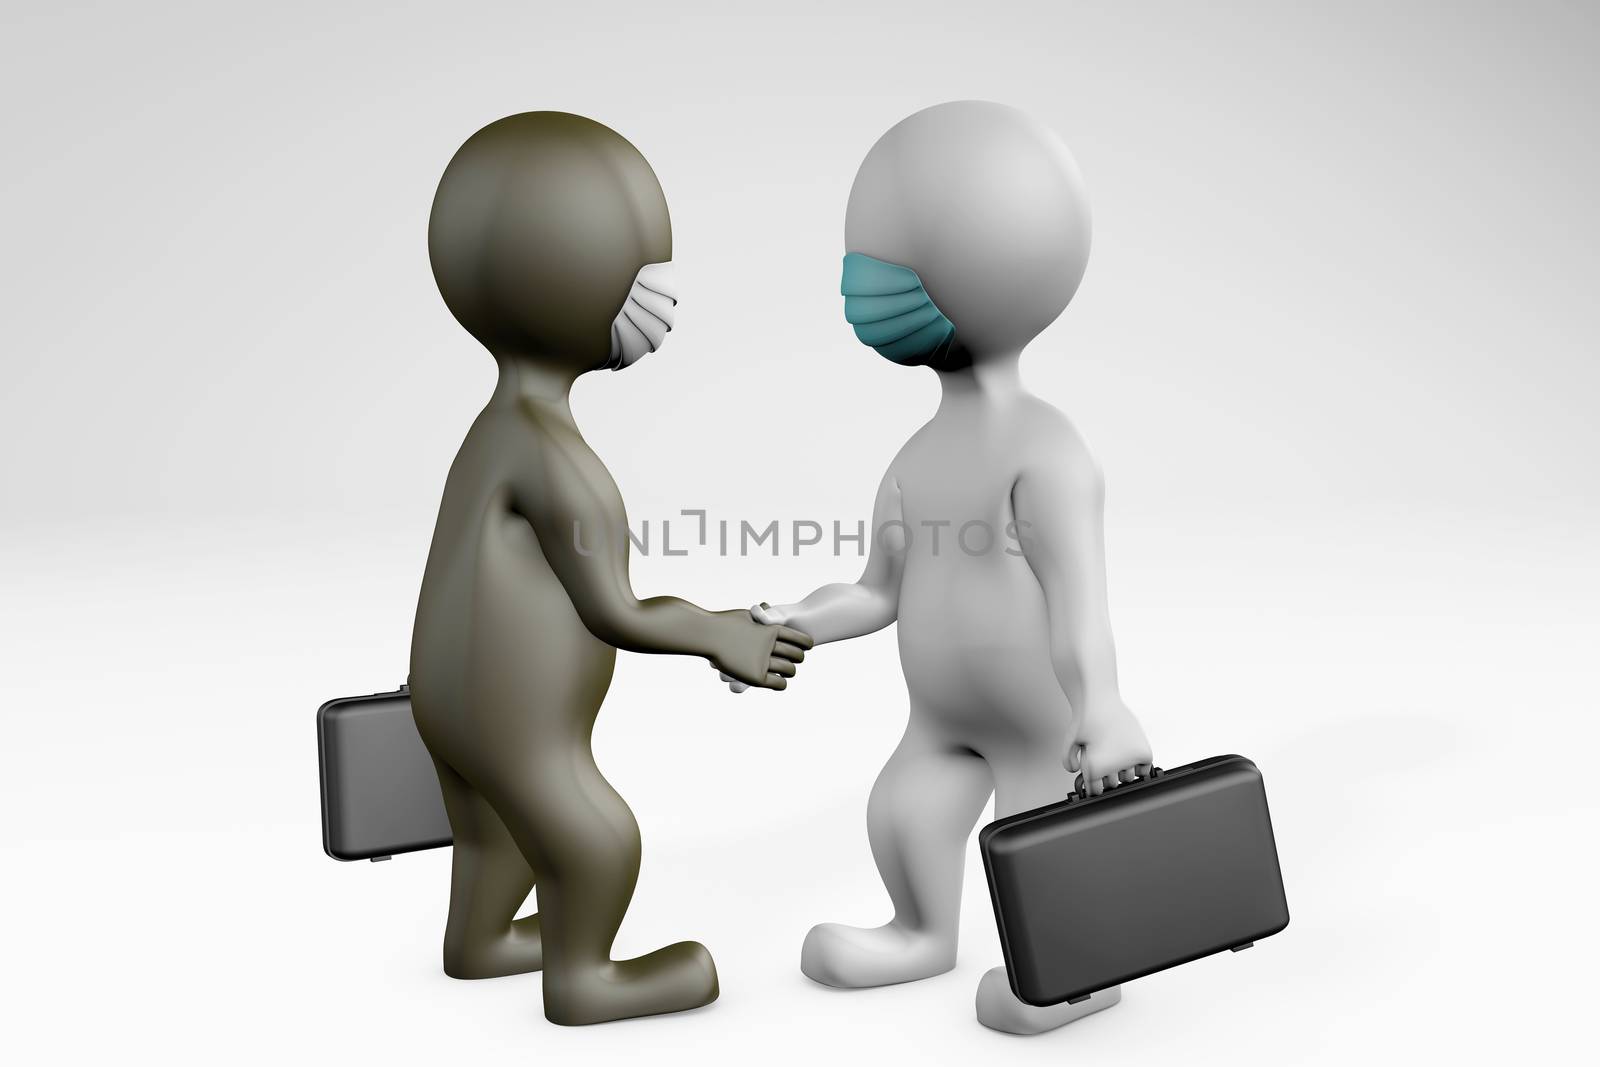 Fatty diverse businessmen with mask doing business deal 3d rende by F1b0nacci